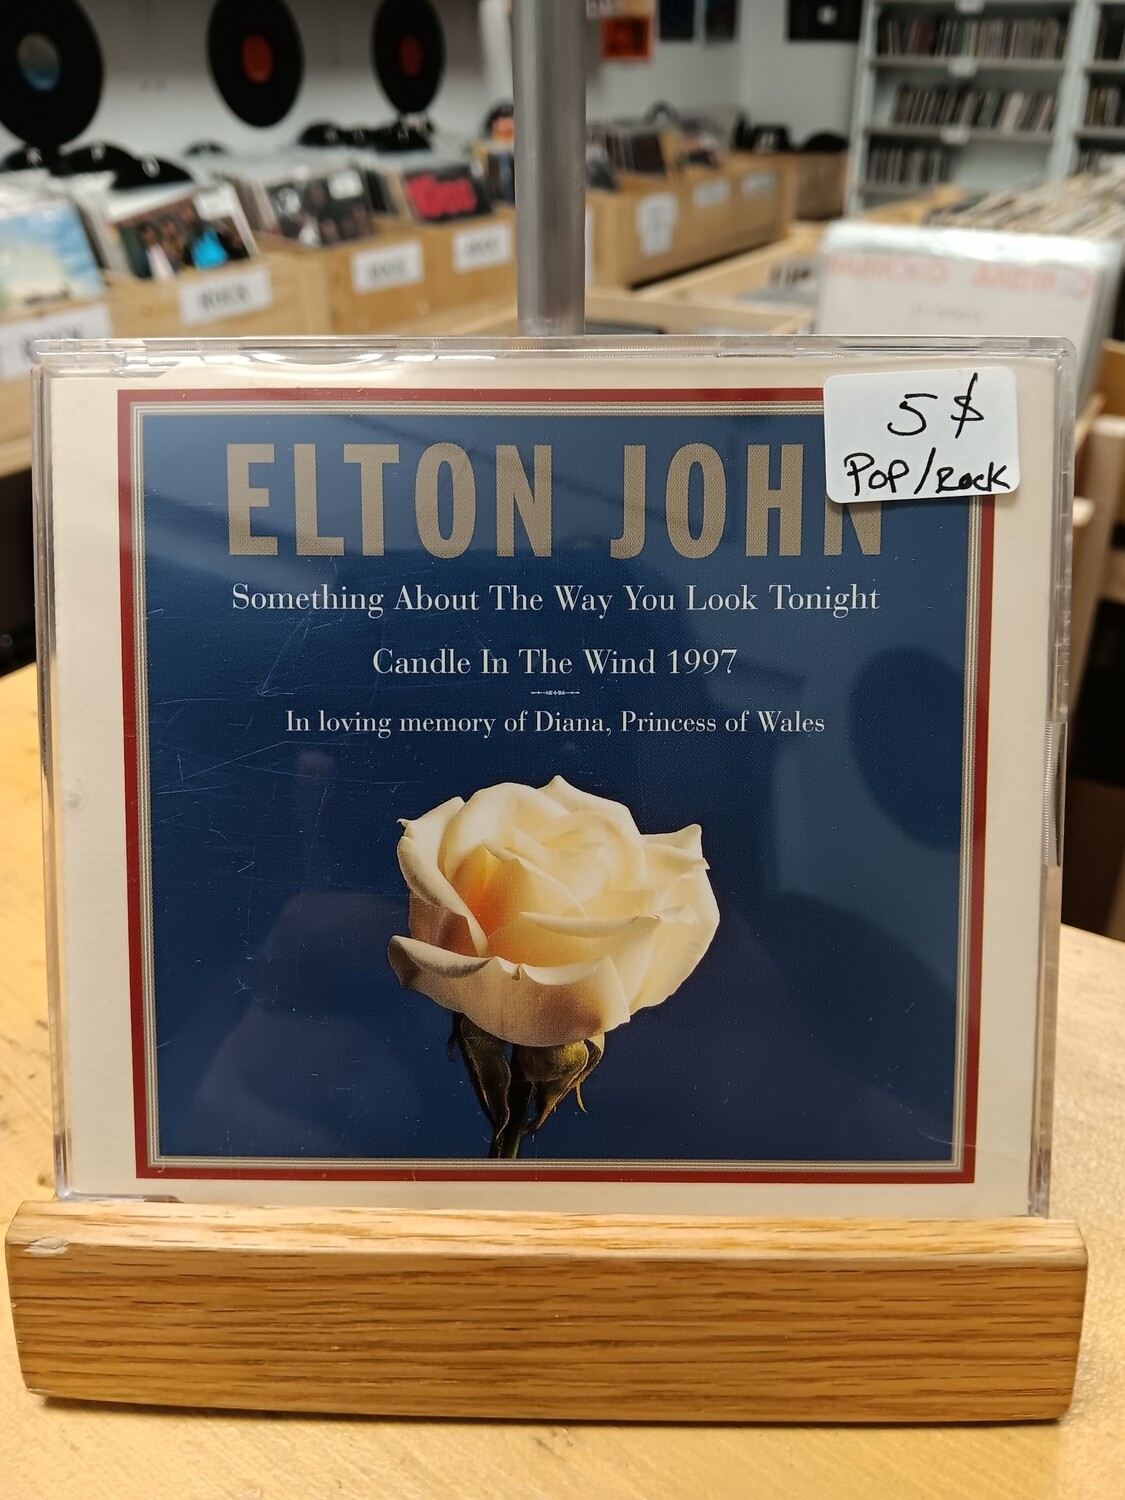 Elton John - Candle in the wind 1997 (CD)